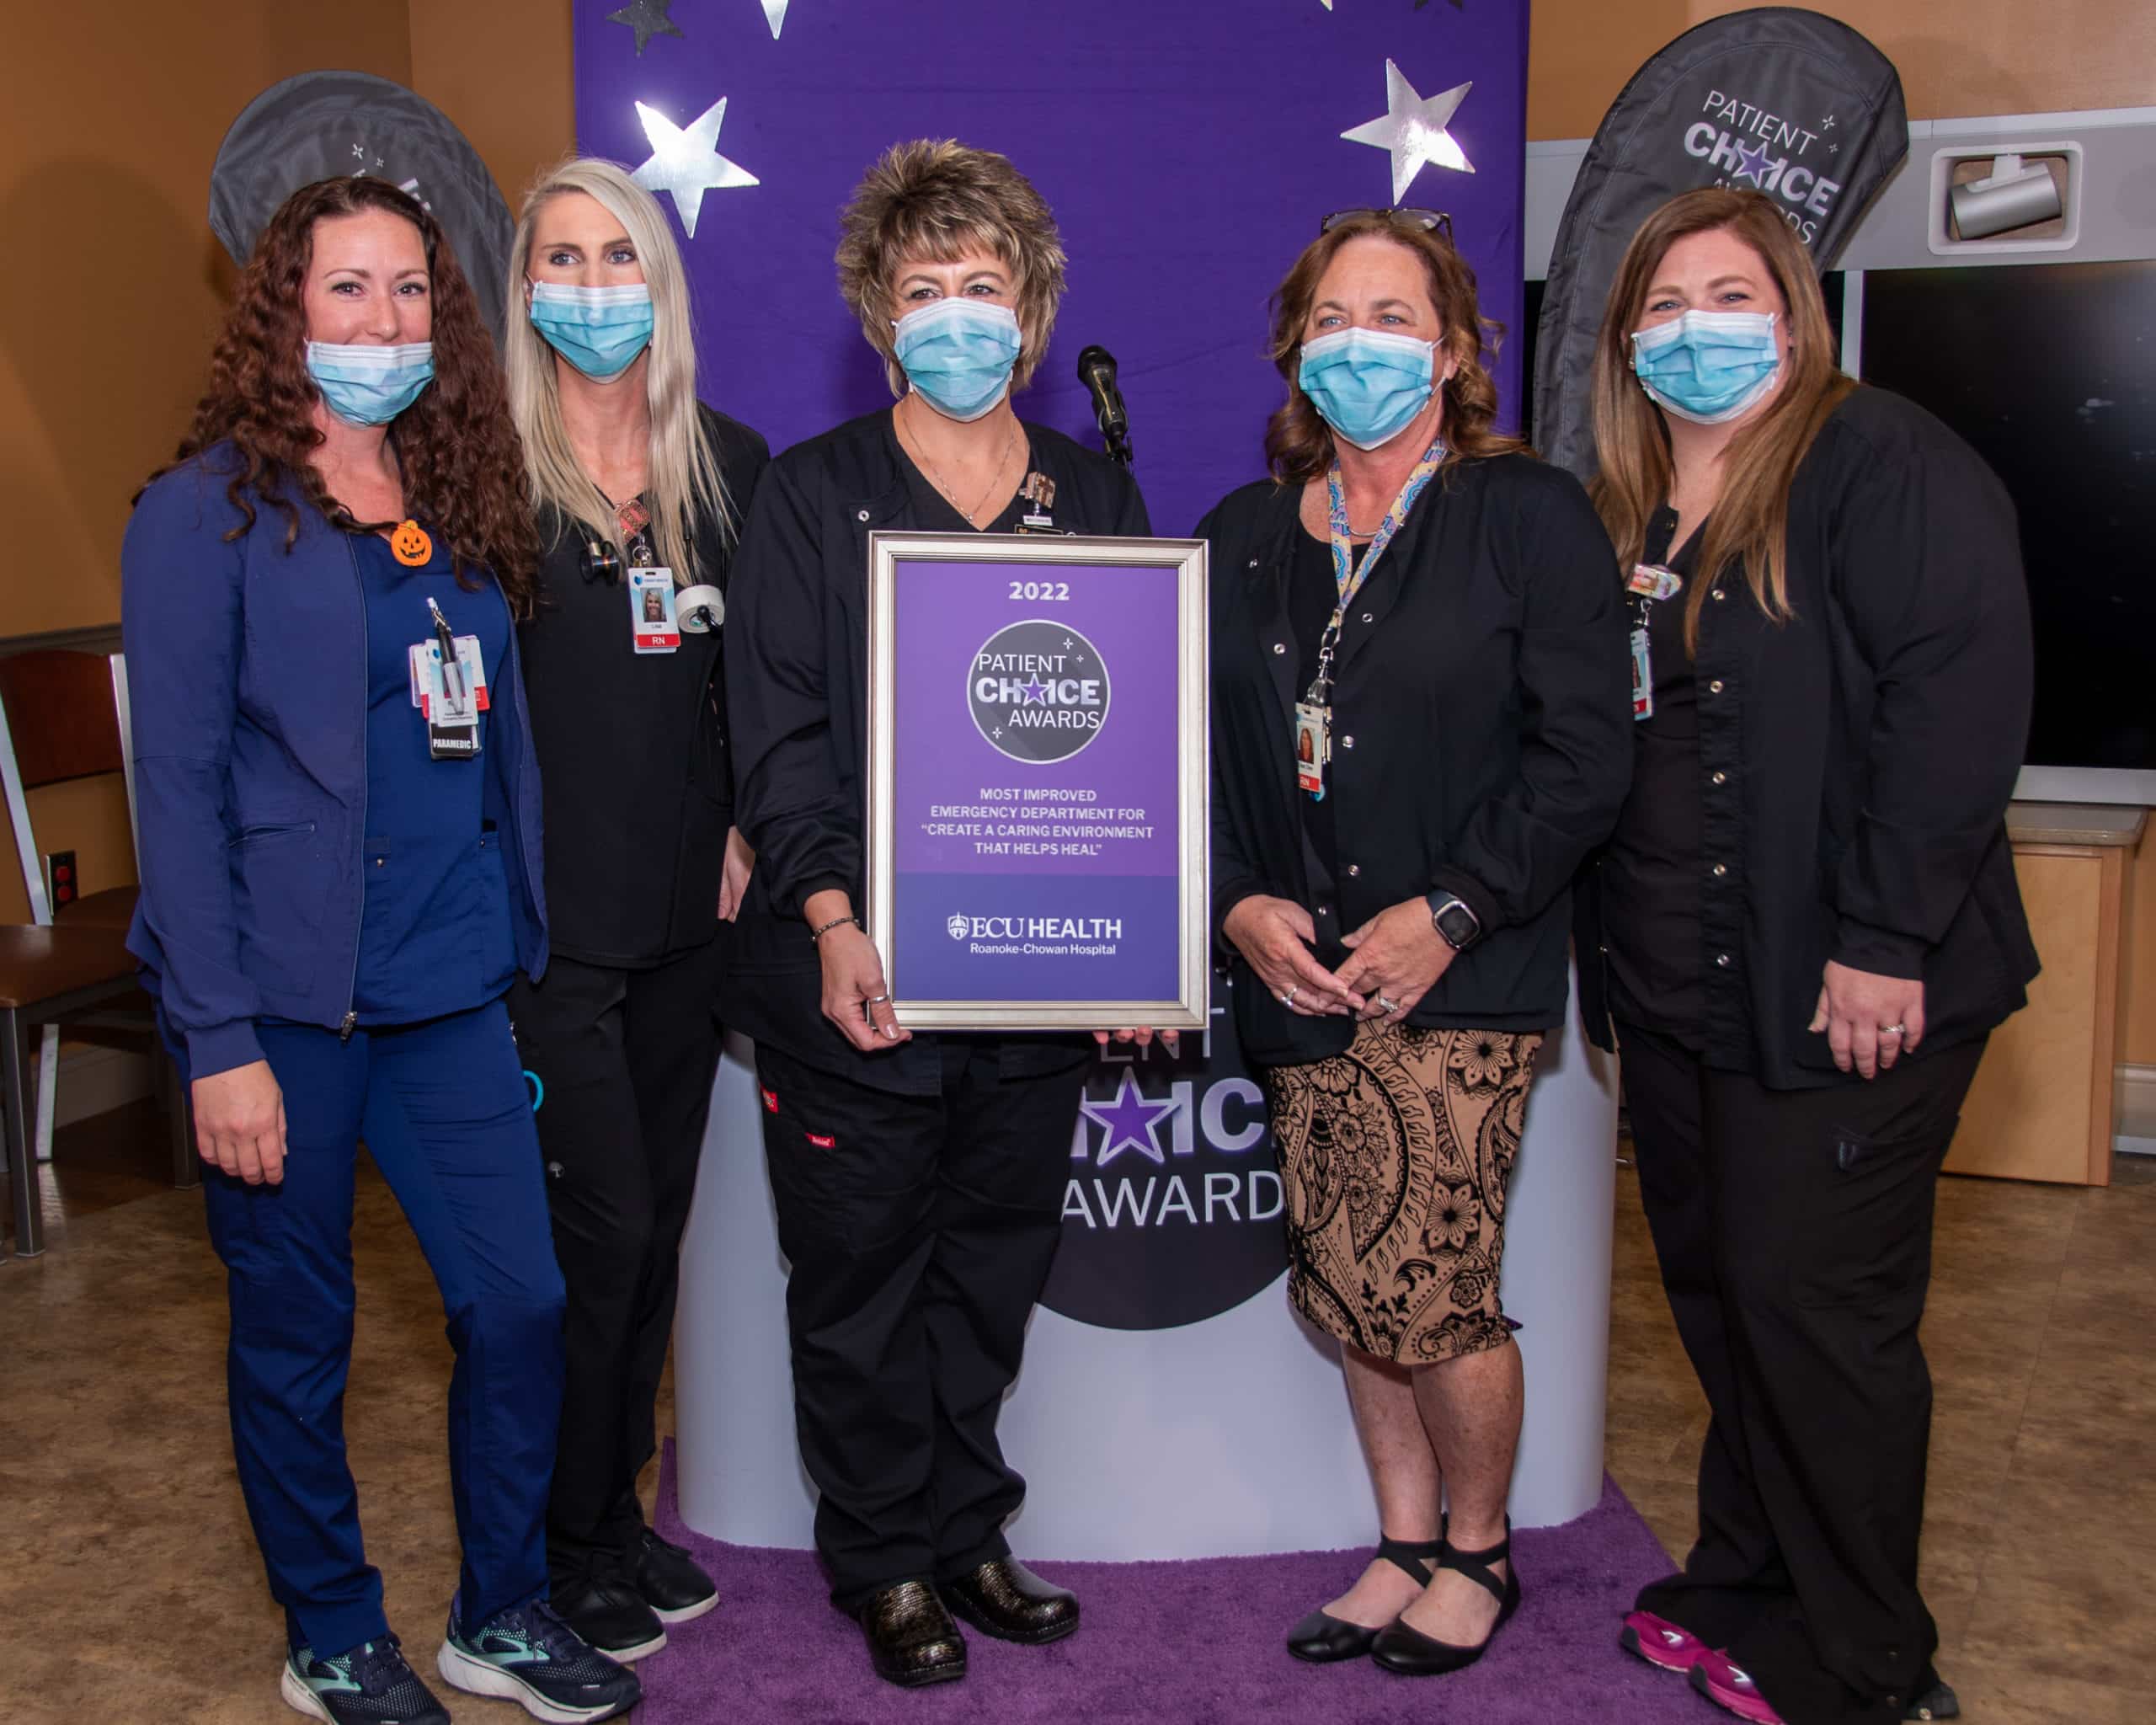 The ECU Health Roanoke-Chowan Hospital – Emergency Department team poses for a photo after being presented with the Patient Choice Award for Most Improved Emergency Department for Creating a Caring Environment that Helps Heal.